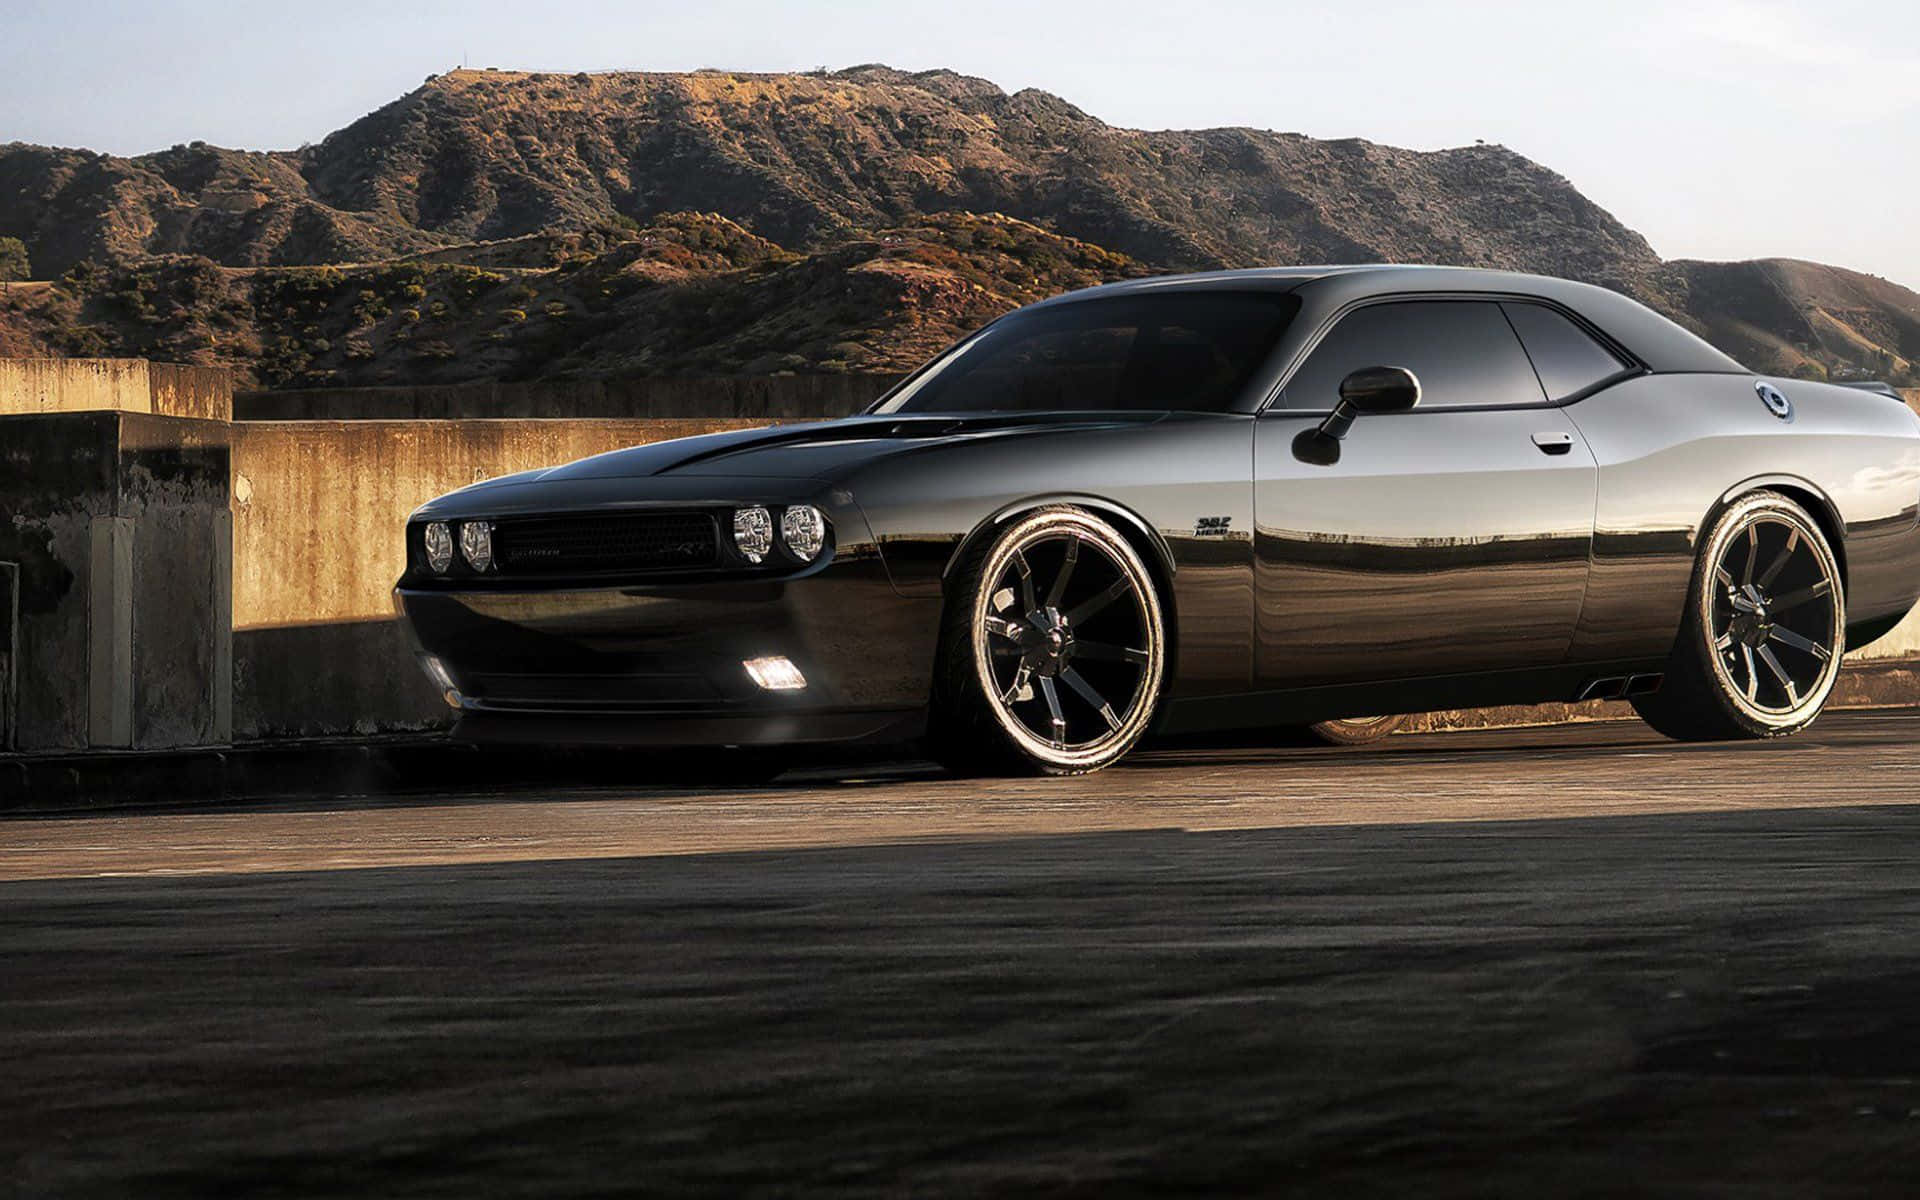 Stunning Dodge Charger on the Open Road Wallpaper